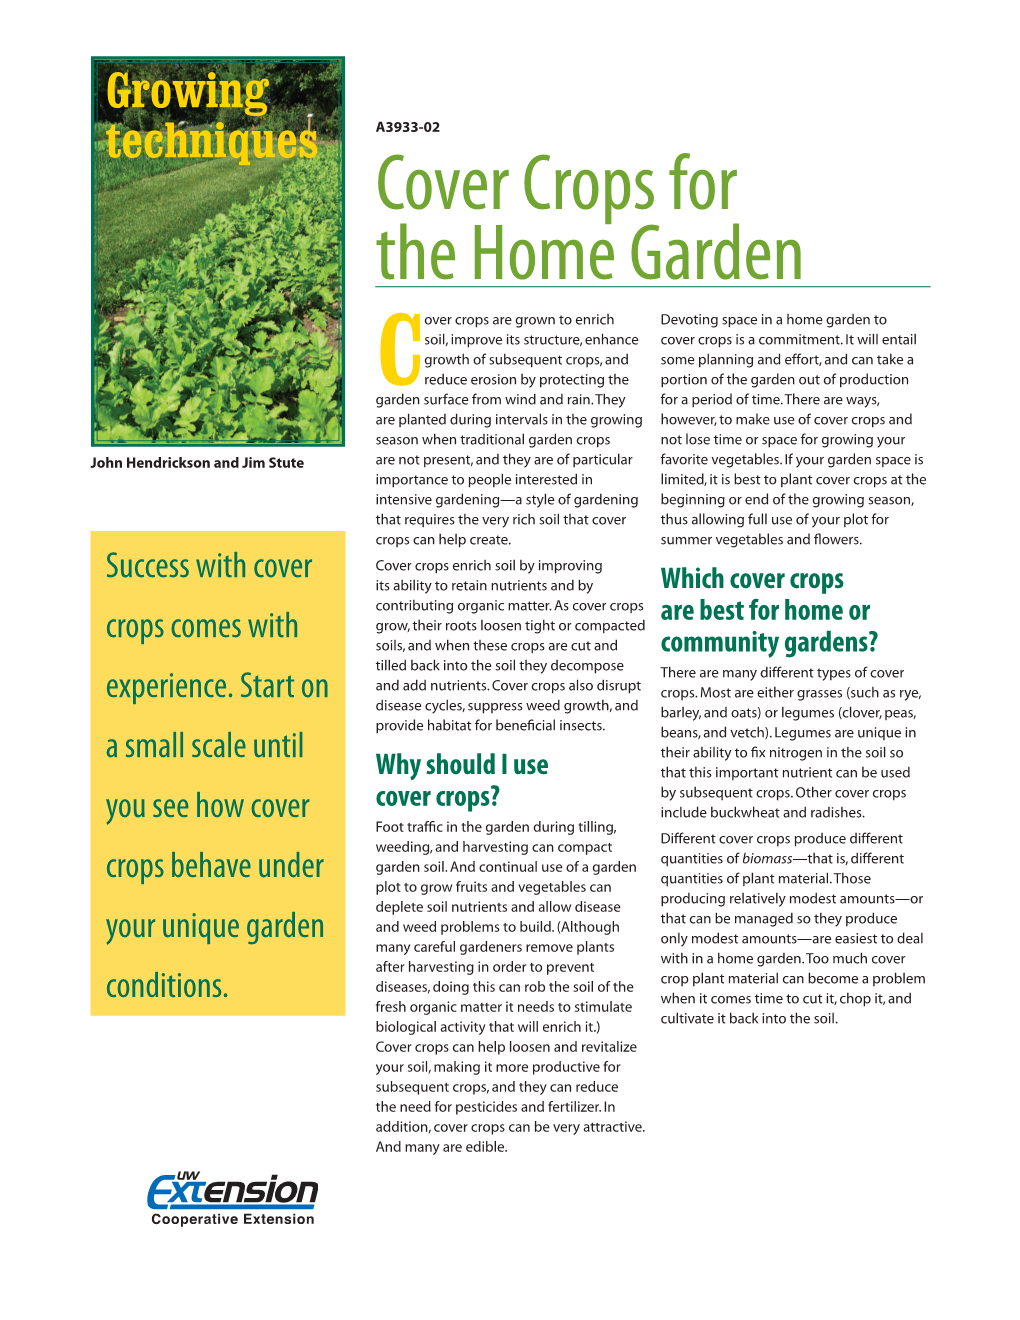 Cover Crops for the Home Garden (A3933-02) I-04-2012 6